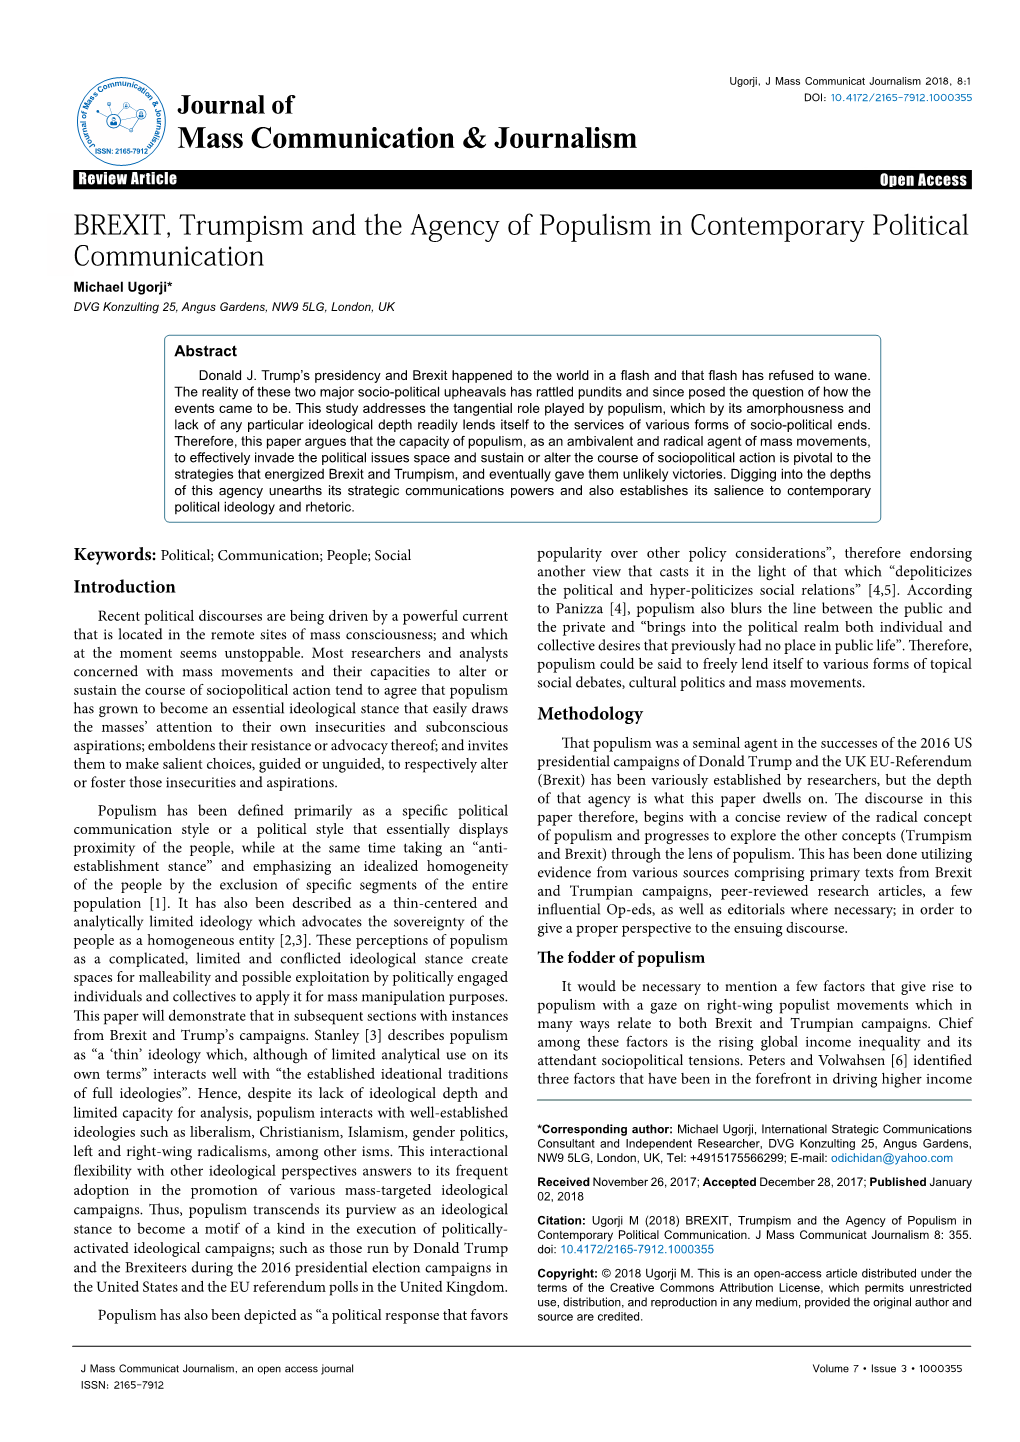 BREXIT, Trumpism and the Agency of Populism in Contemporary Political Communication Michael Ugorji* DVG Konzulting 25, Angus Gardens, NW9 5LG, London, UK